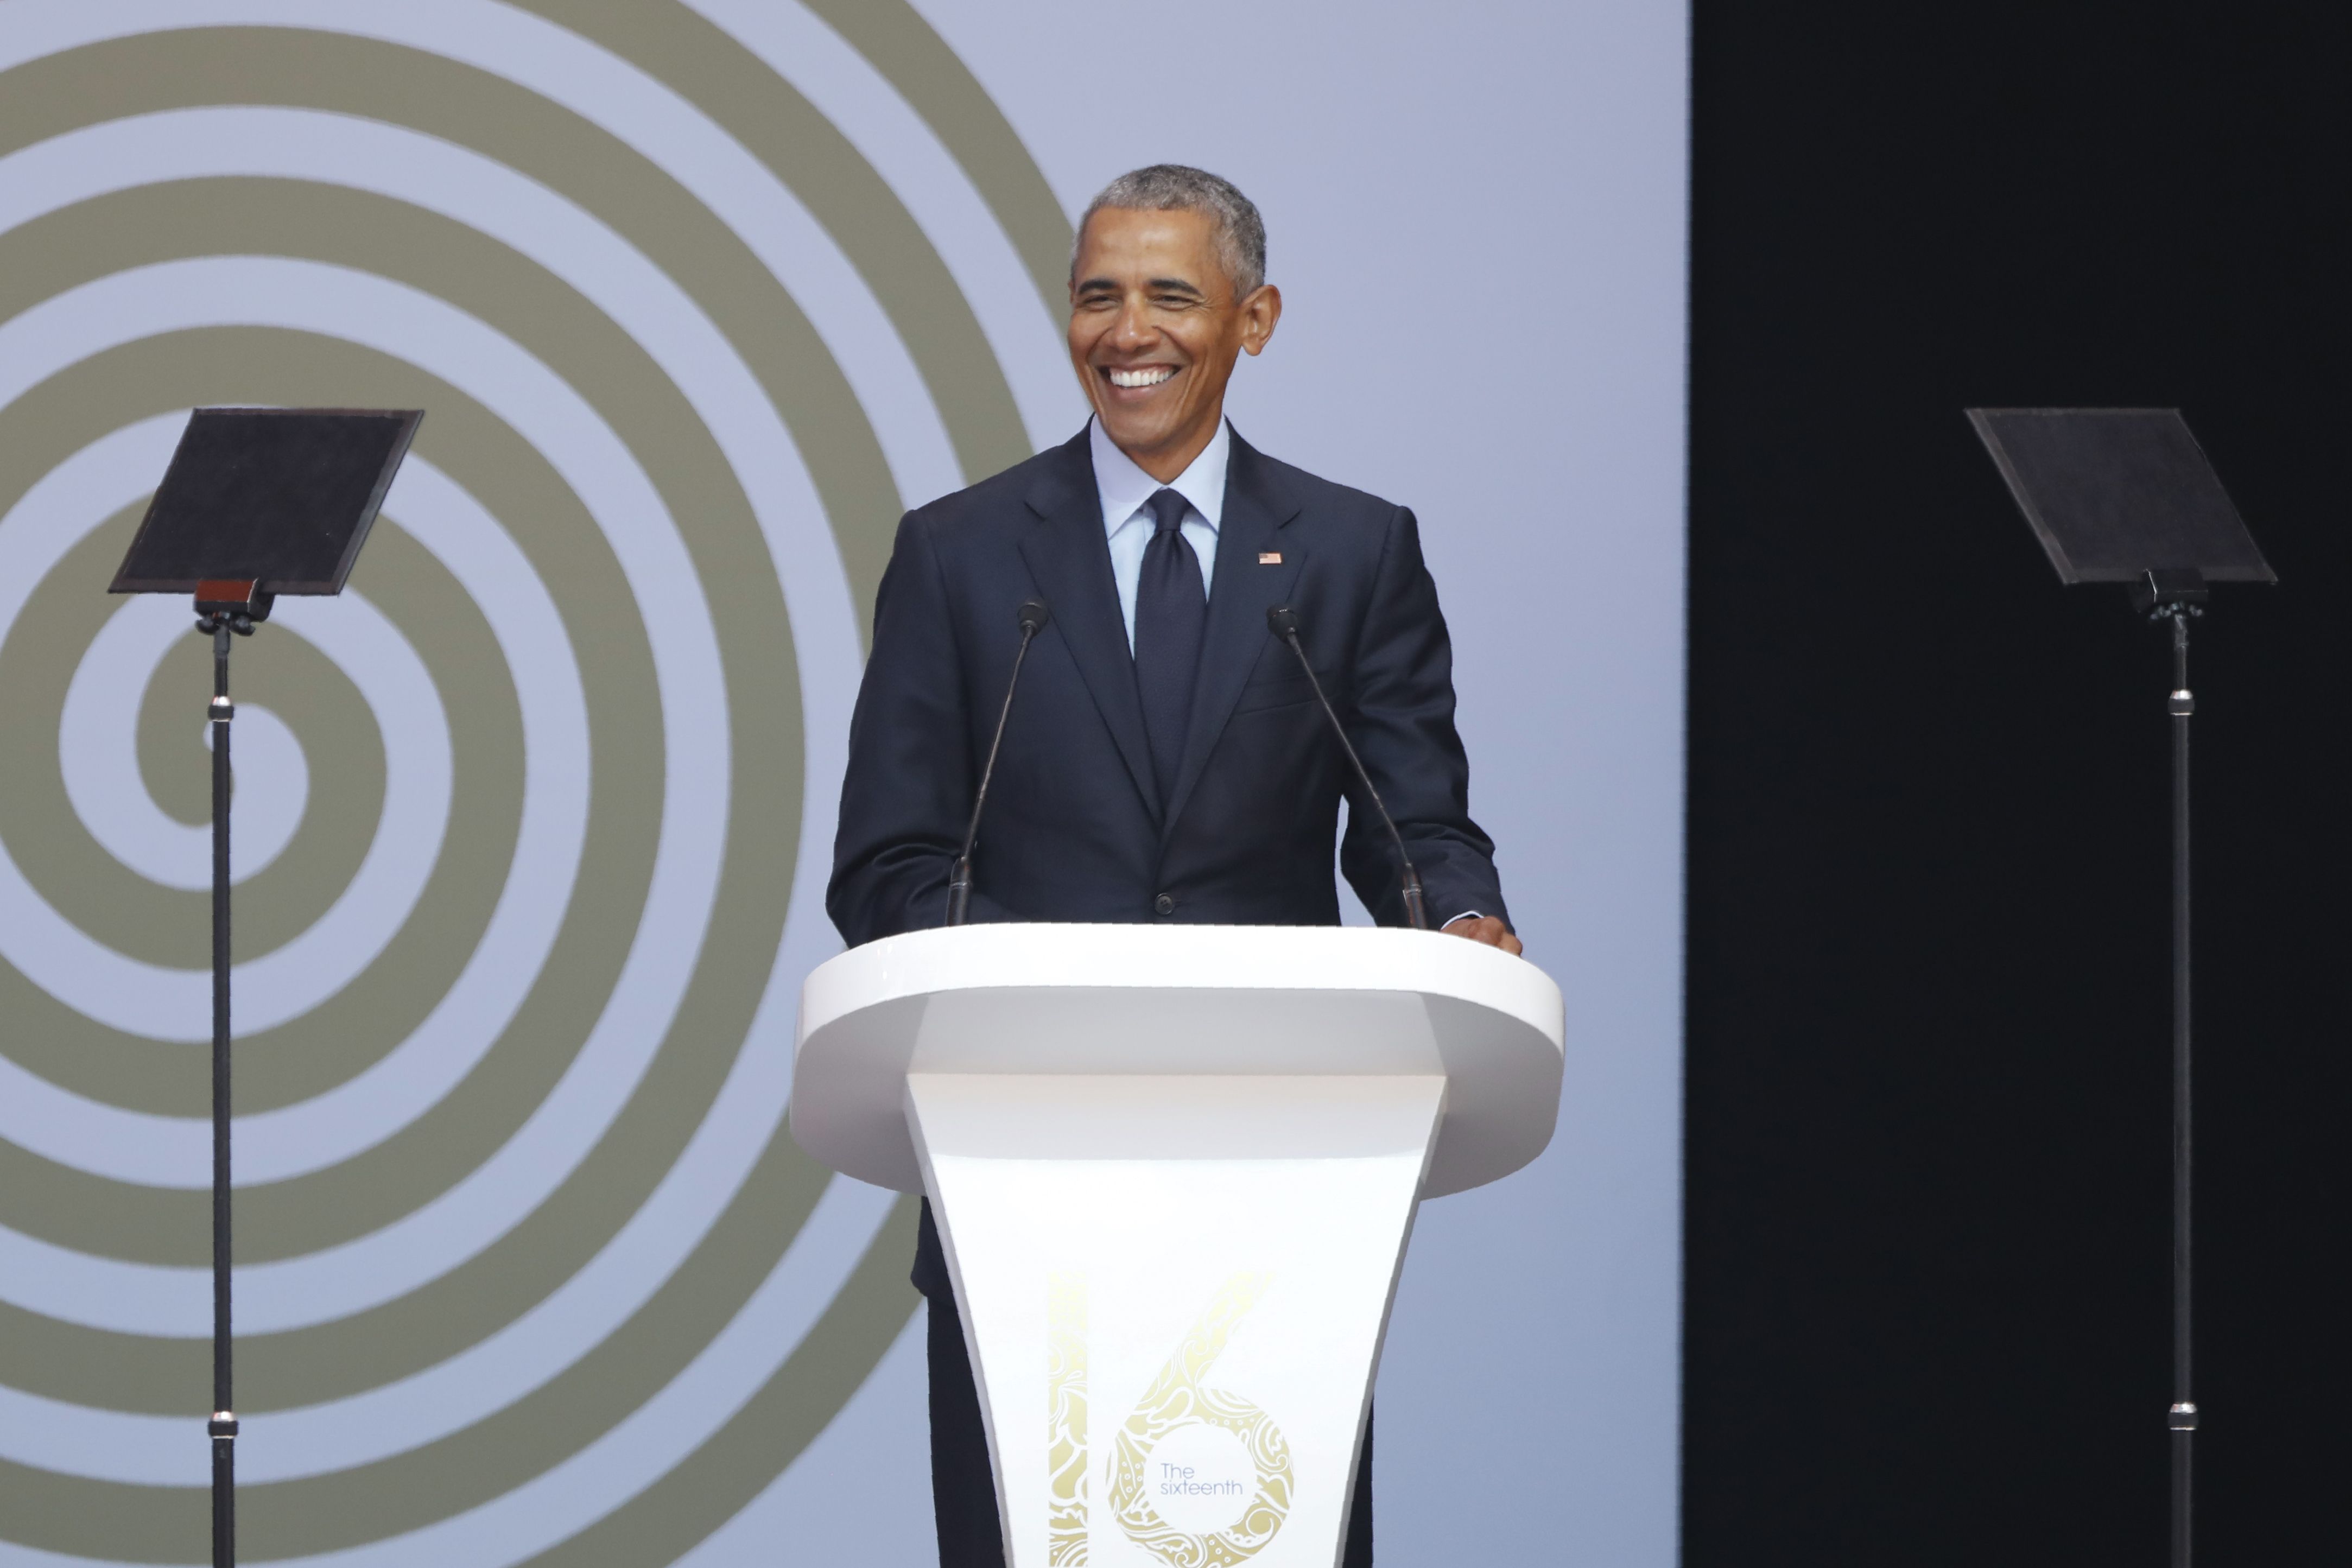 Barack Obama speaks during the 2018 Nelson Mandela Annual Lecture at the Wanderers cricket stadium in Johannesburg on July 17, 2018. (MARCO LONGARI&mdash;AFP/Getty Images)